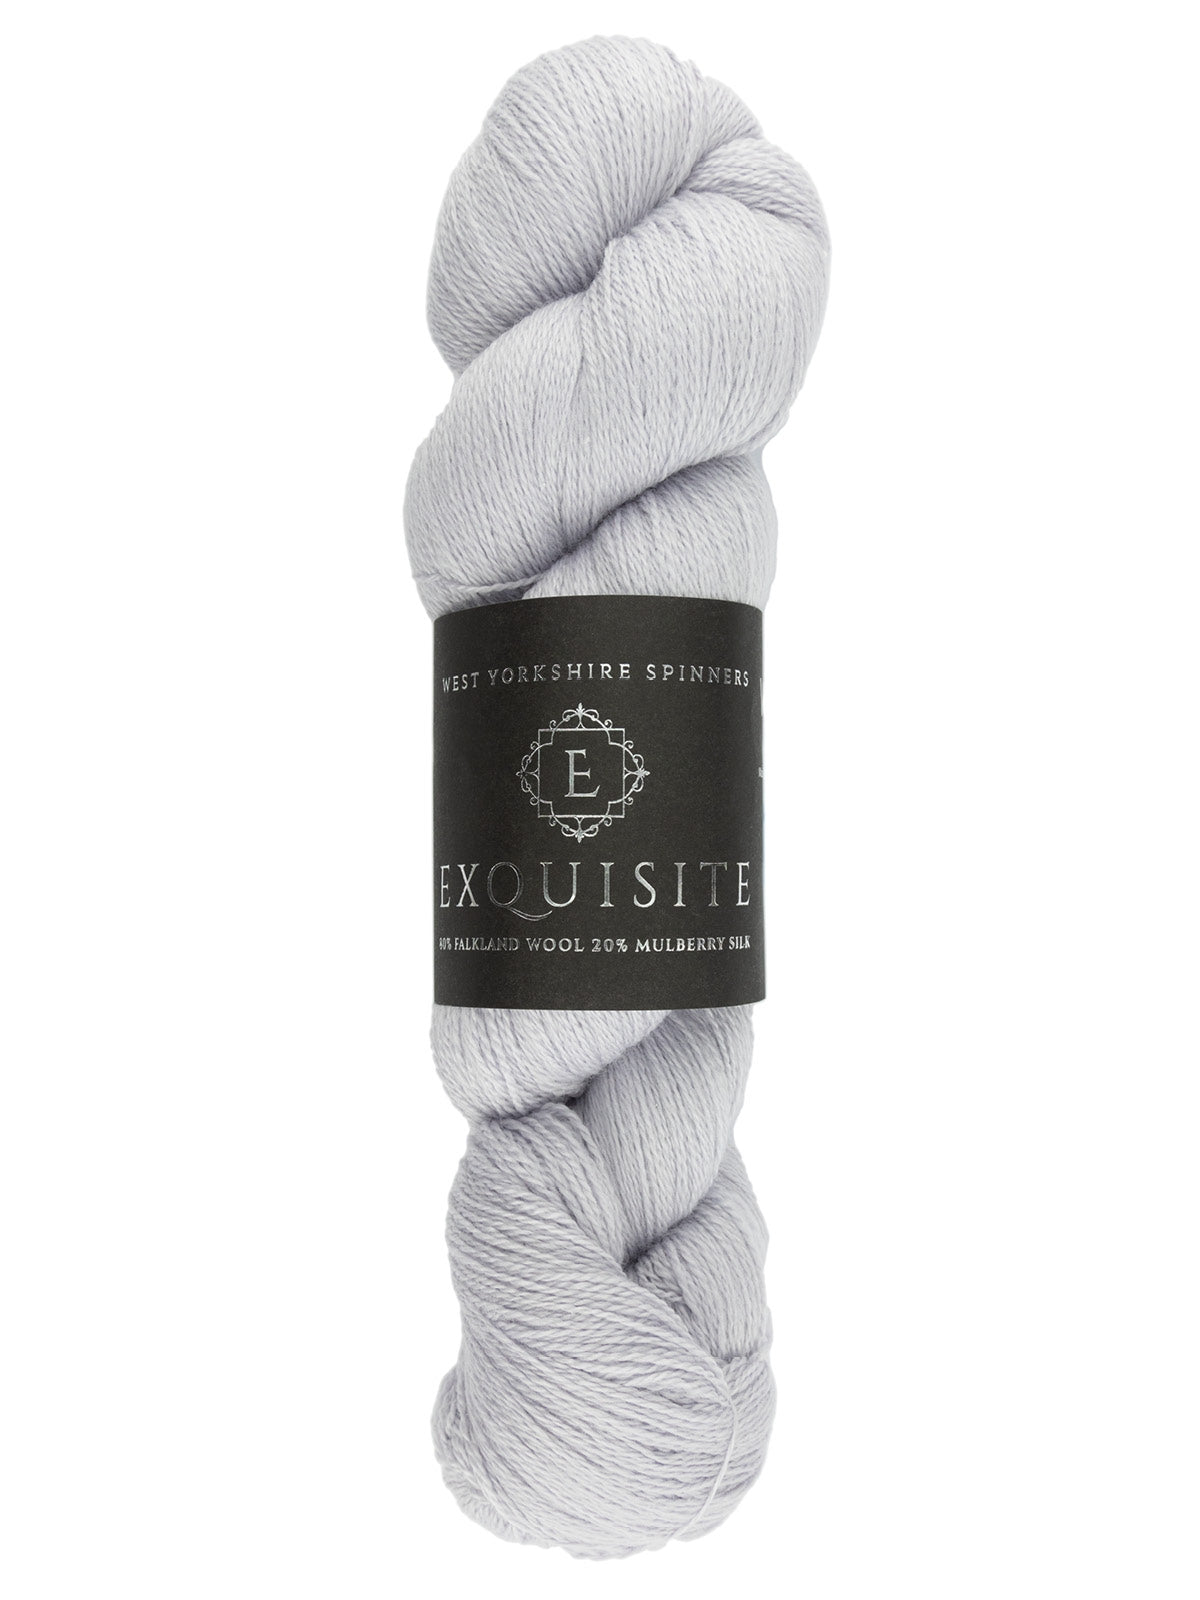 West Yorkshire Spinners Exquiste Lace color light gray